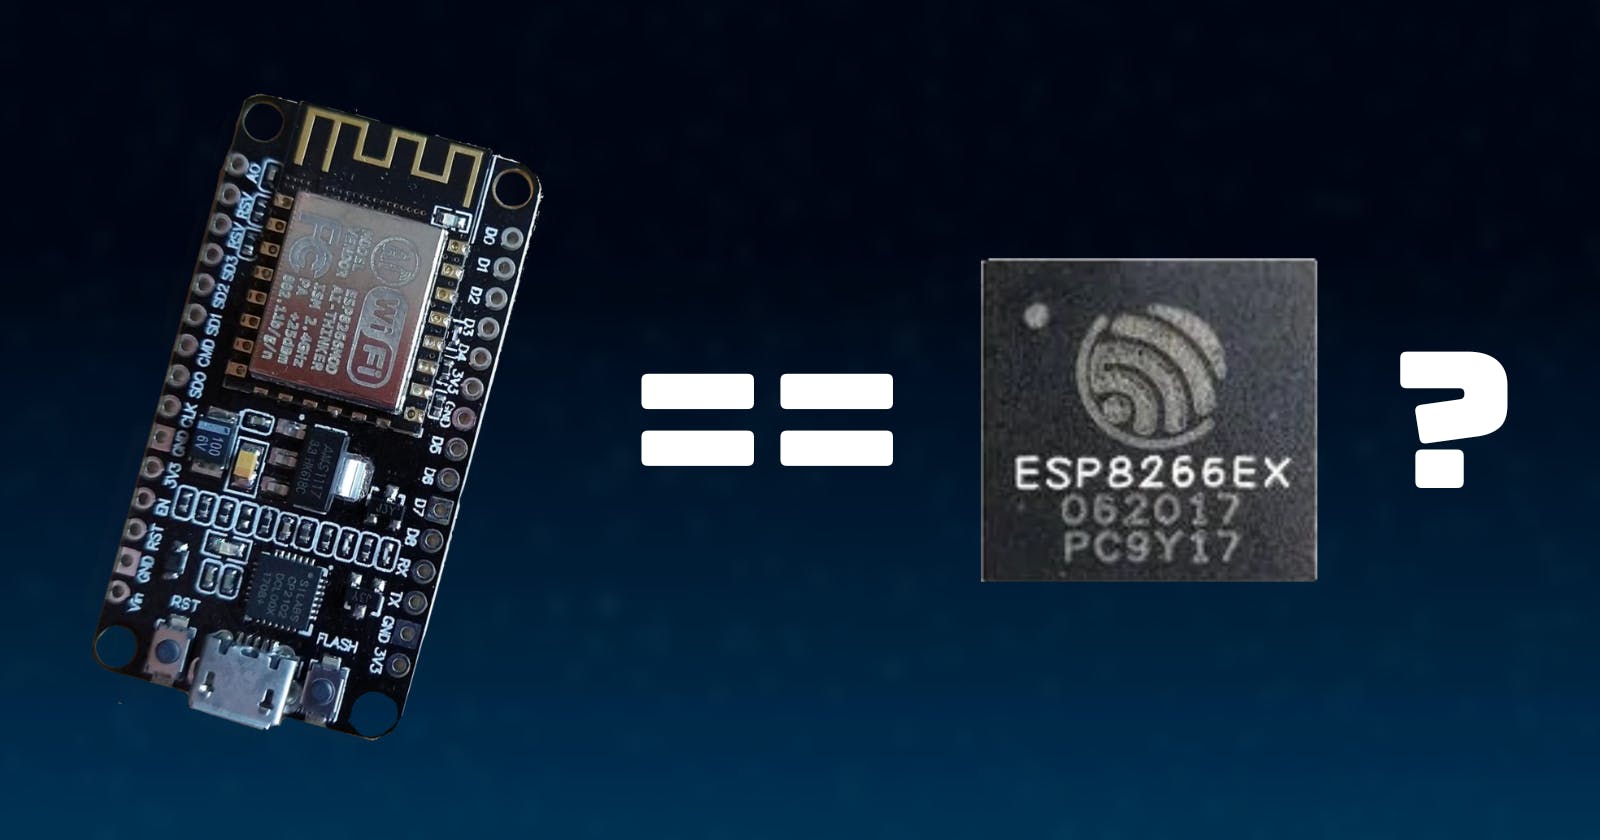 NodeMCU, ESP12, ESP8266 - What is the difference?